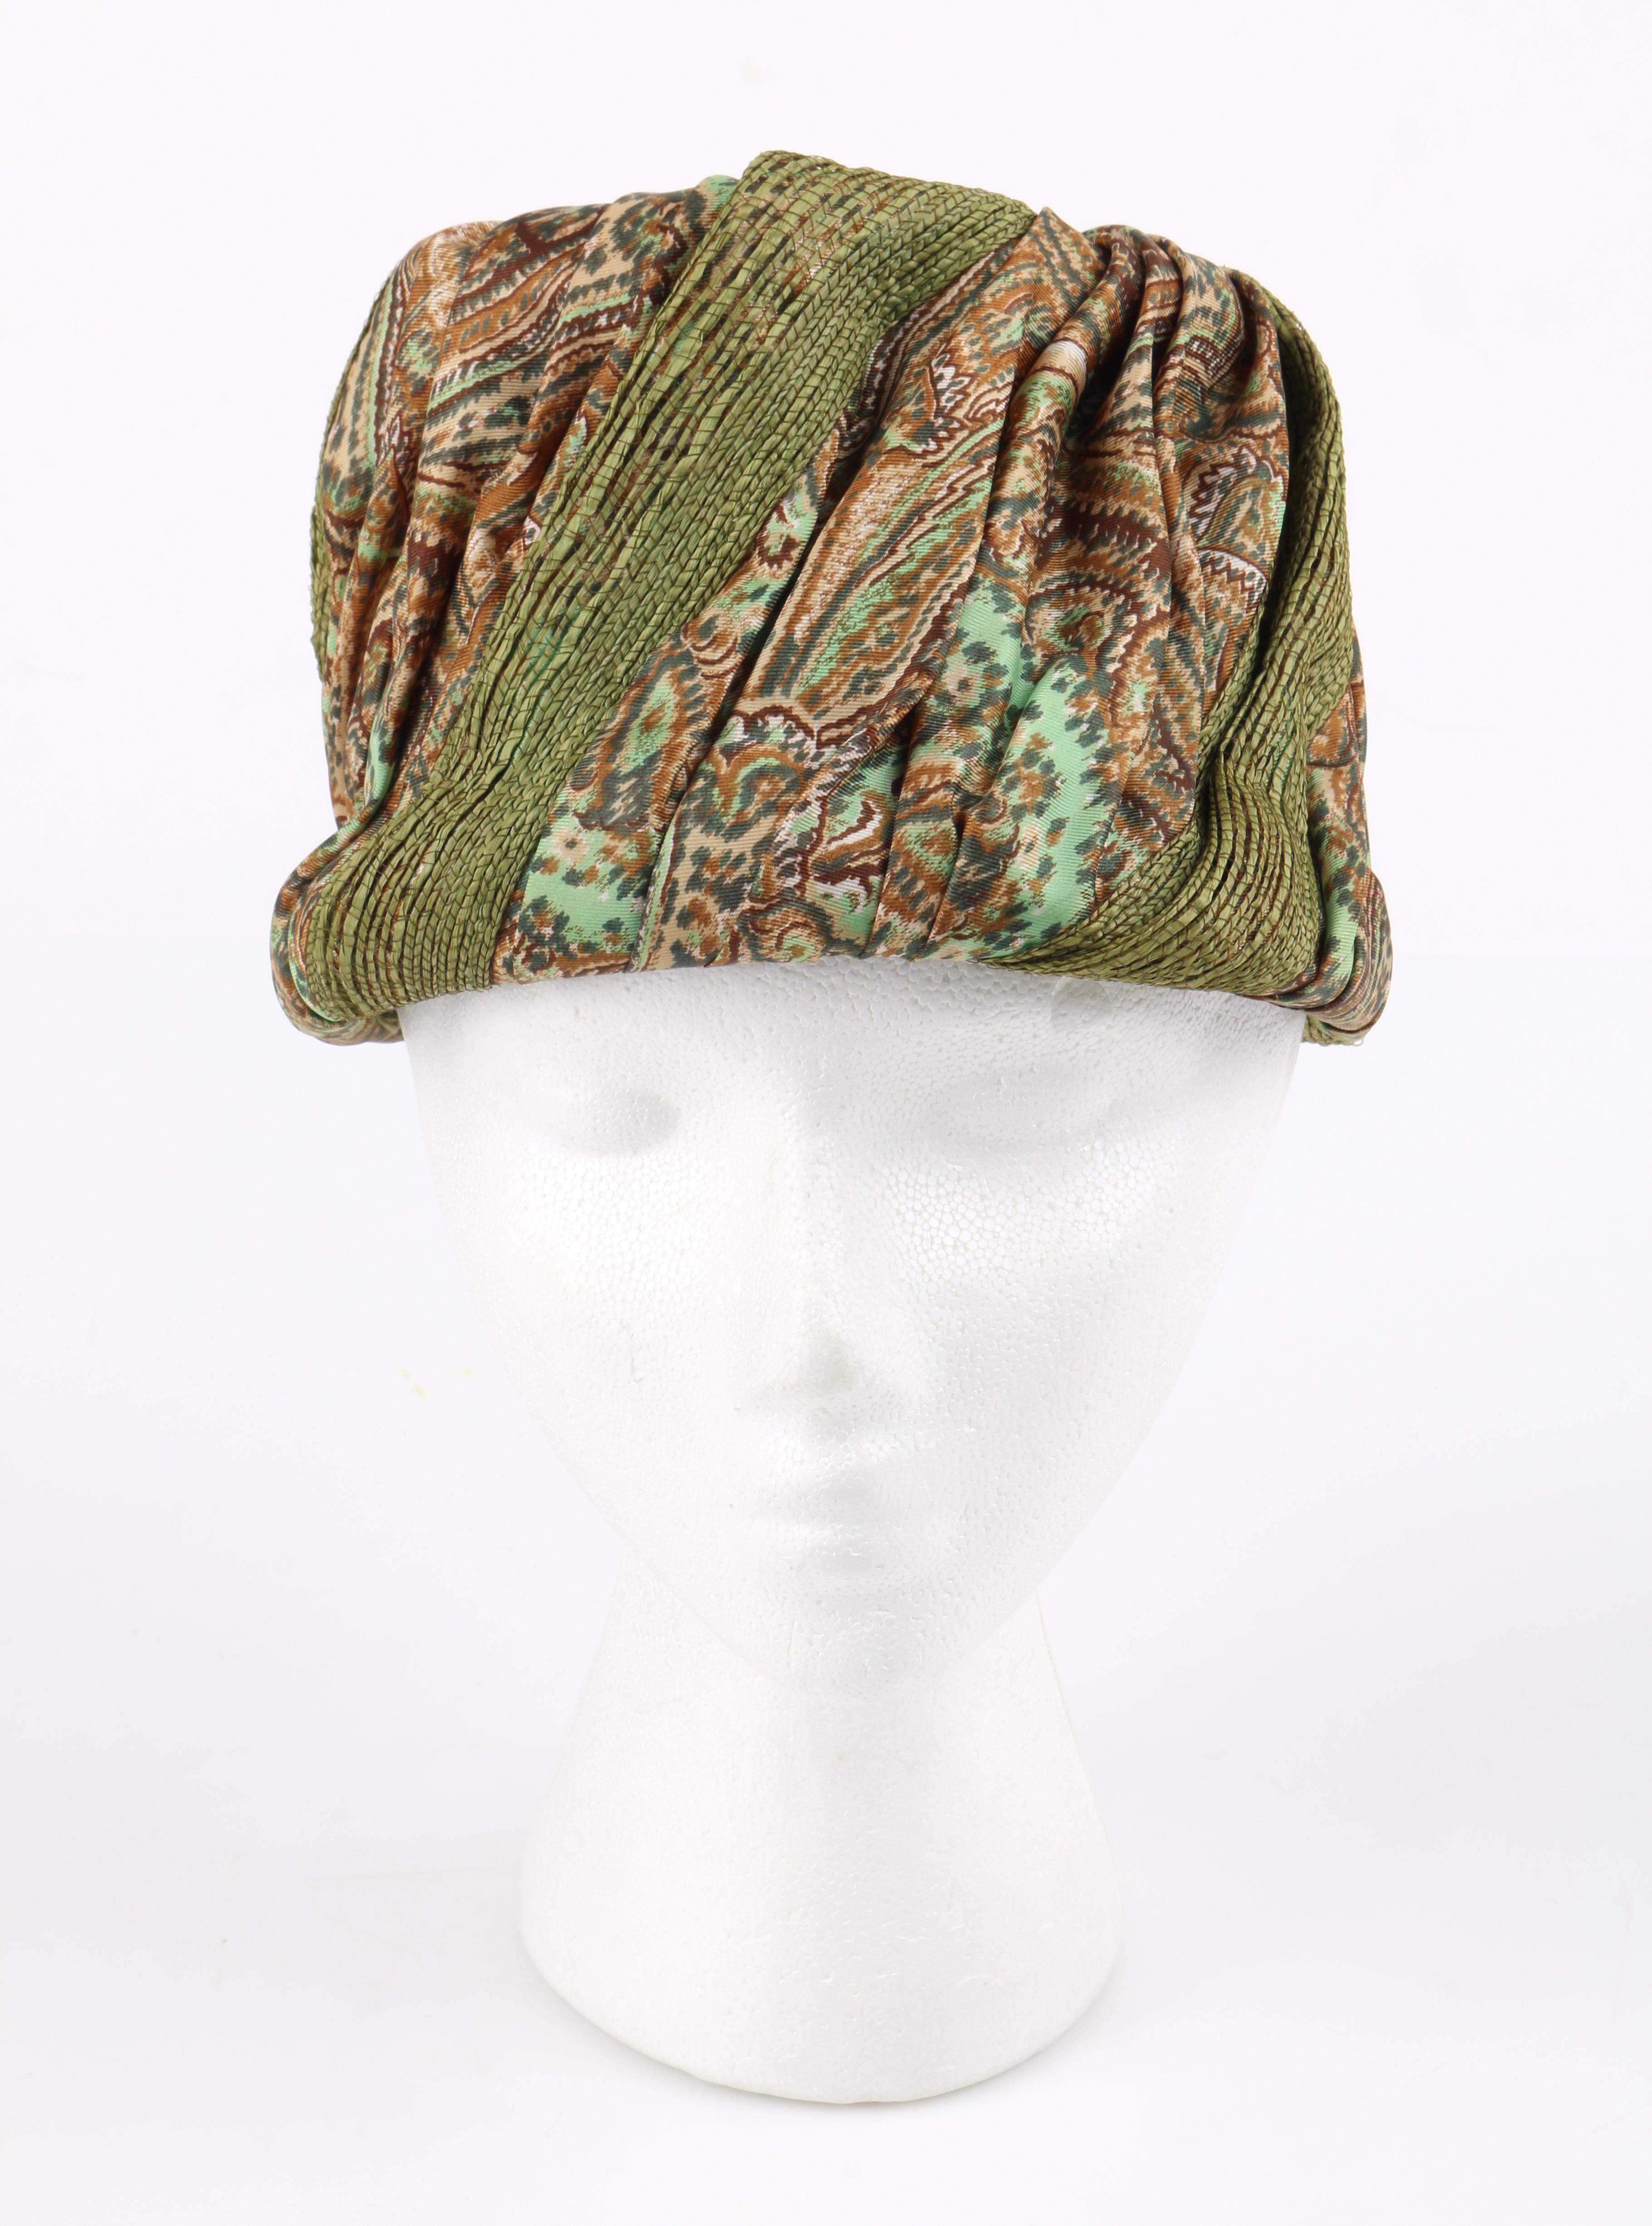 DESCRIPTION: Miss Dior by CHRISTIAN DIOR c.1960s Green Paisley Print Silk & Straw Pleated Toque Hat
 
Circa: c.1960’s
Label(s): Miss Dior Created by Christian Dior; United Hatters, Cap, and Millinery Workers union label
Style: Toque hat
Color(s):